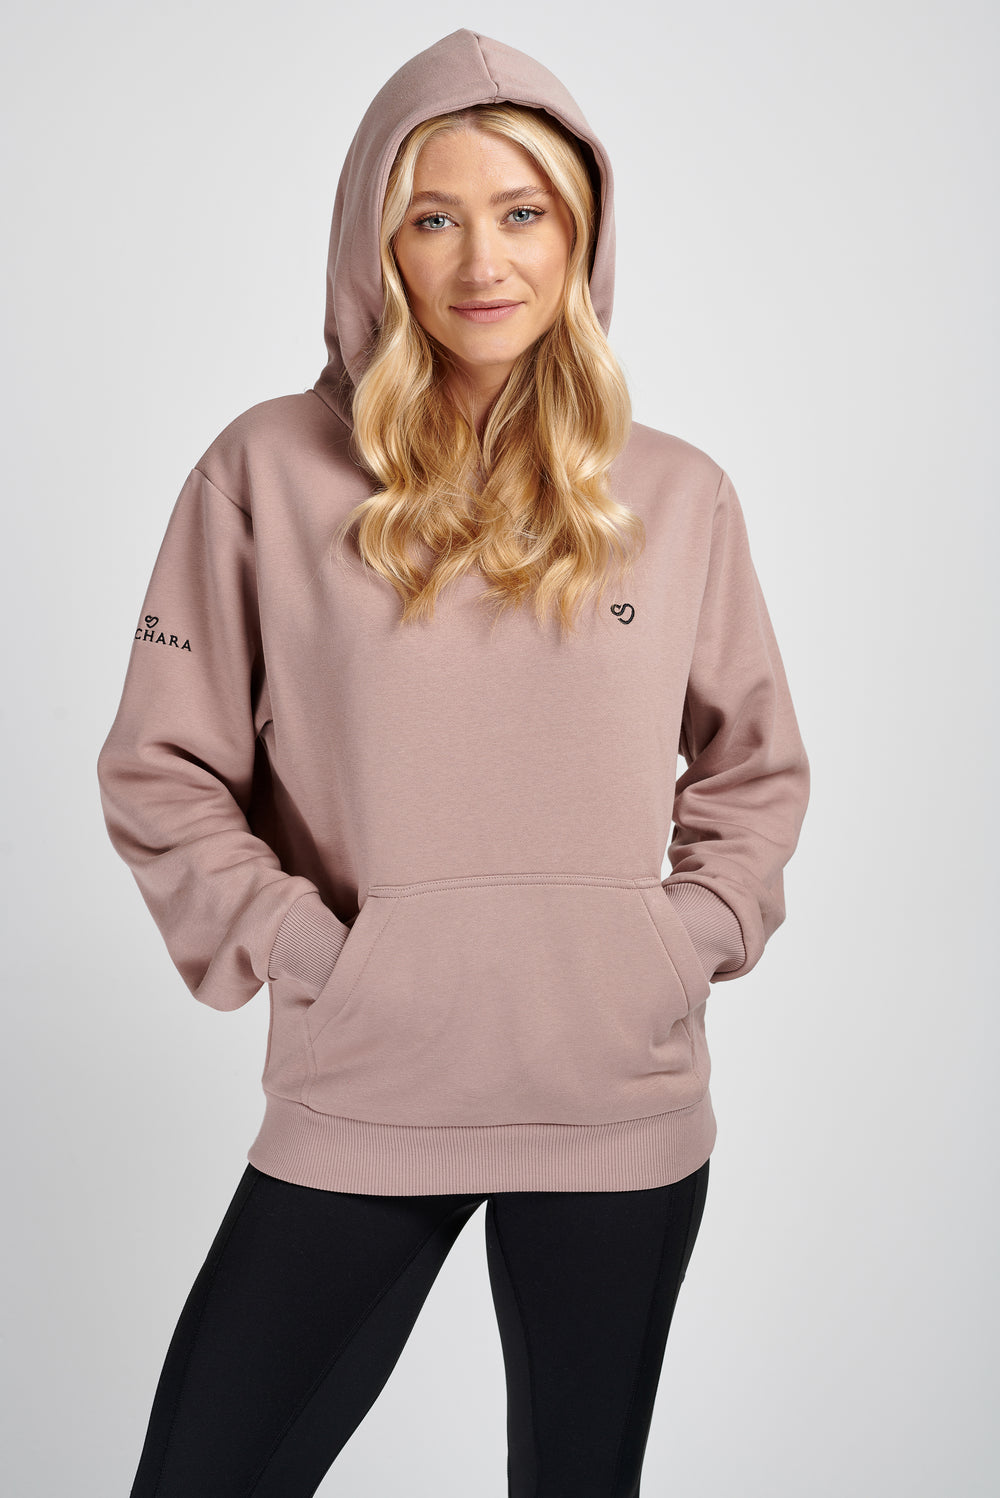 Mochara Hoodie-Southern Sport Horses-The Equestrian